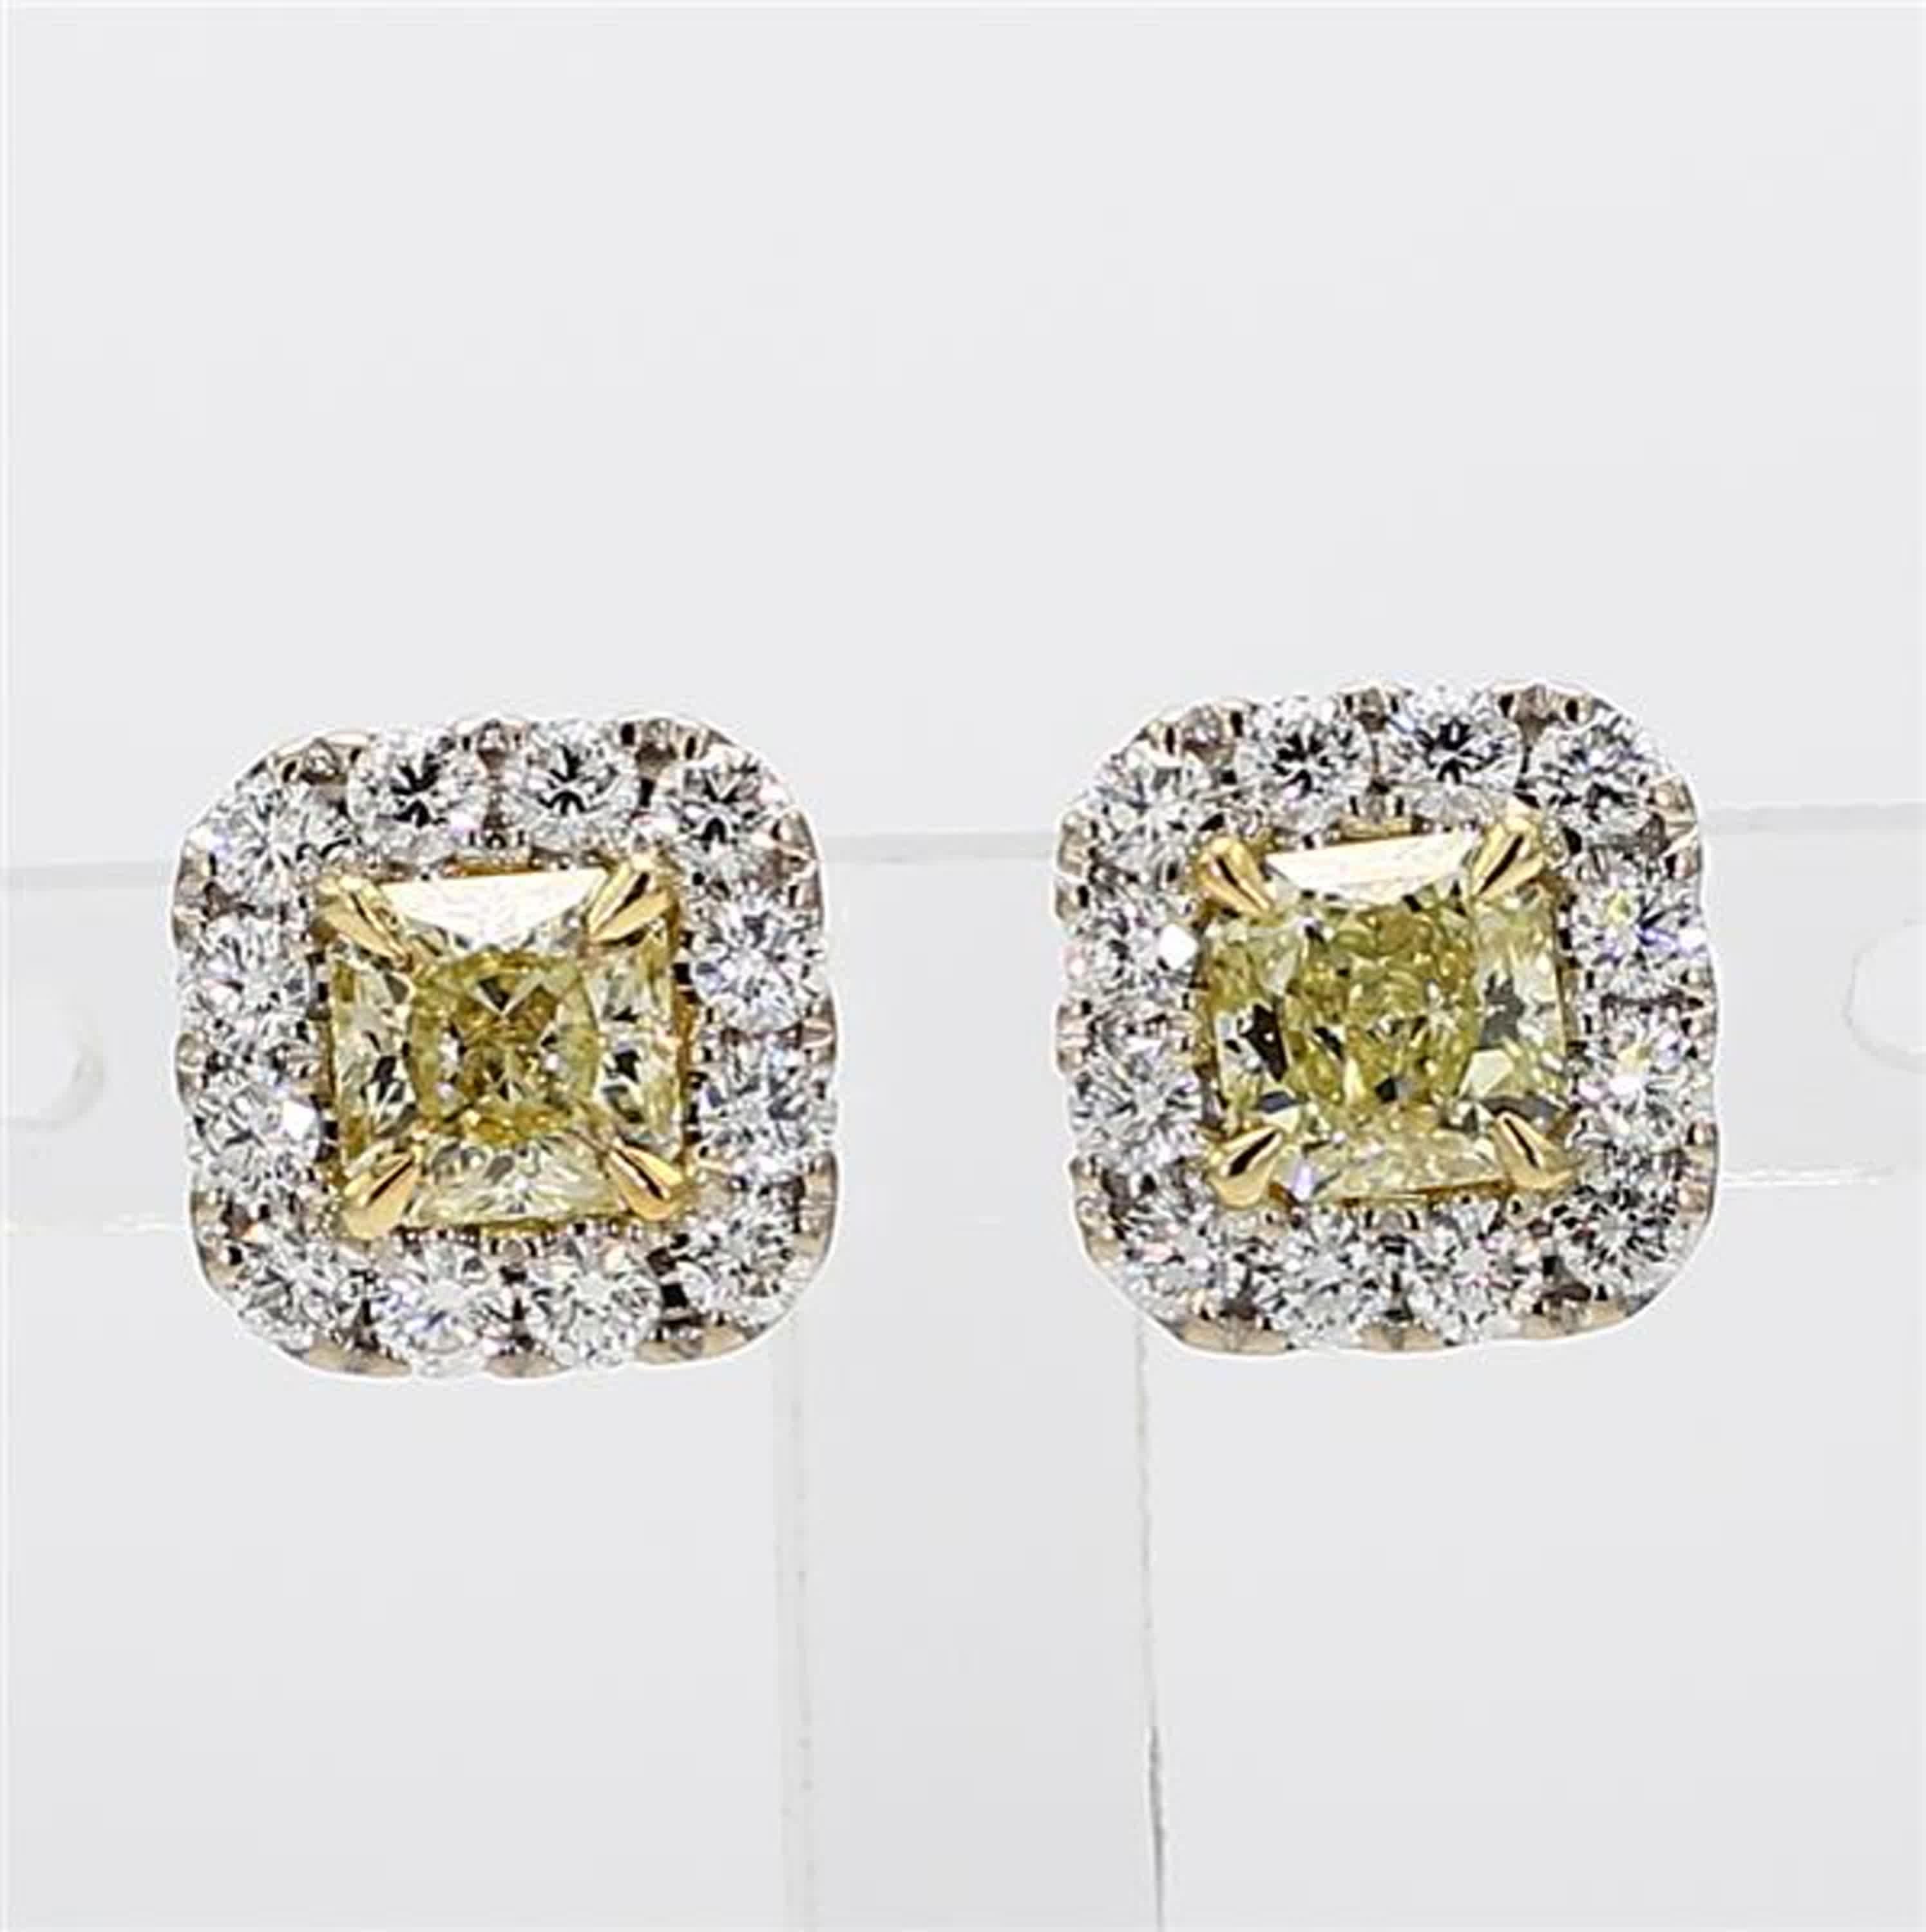 RareGemWorld's classic GIA certified diamond earrings. Mounted in a beautiful 18K Yellow and White Gold setting with natural radiant cut yellow diamonds. The yellow diamonds are surrounded by round natural white diamond melee. These earrings are